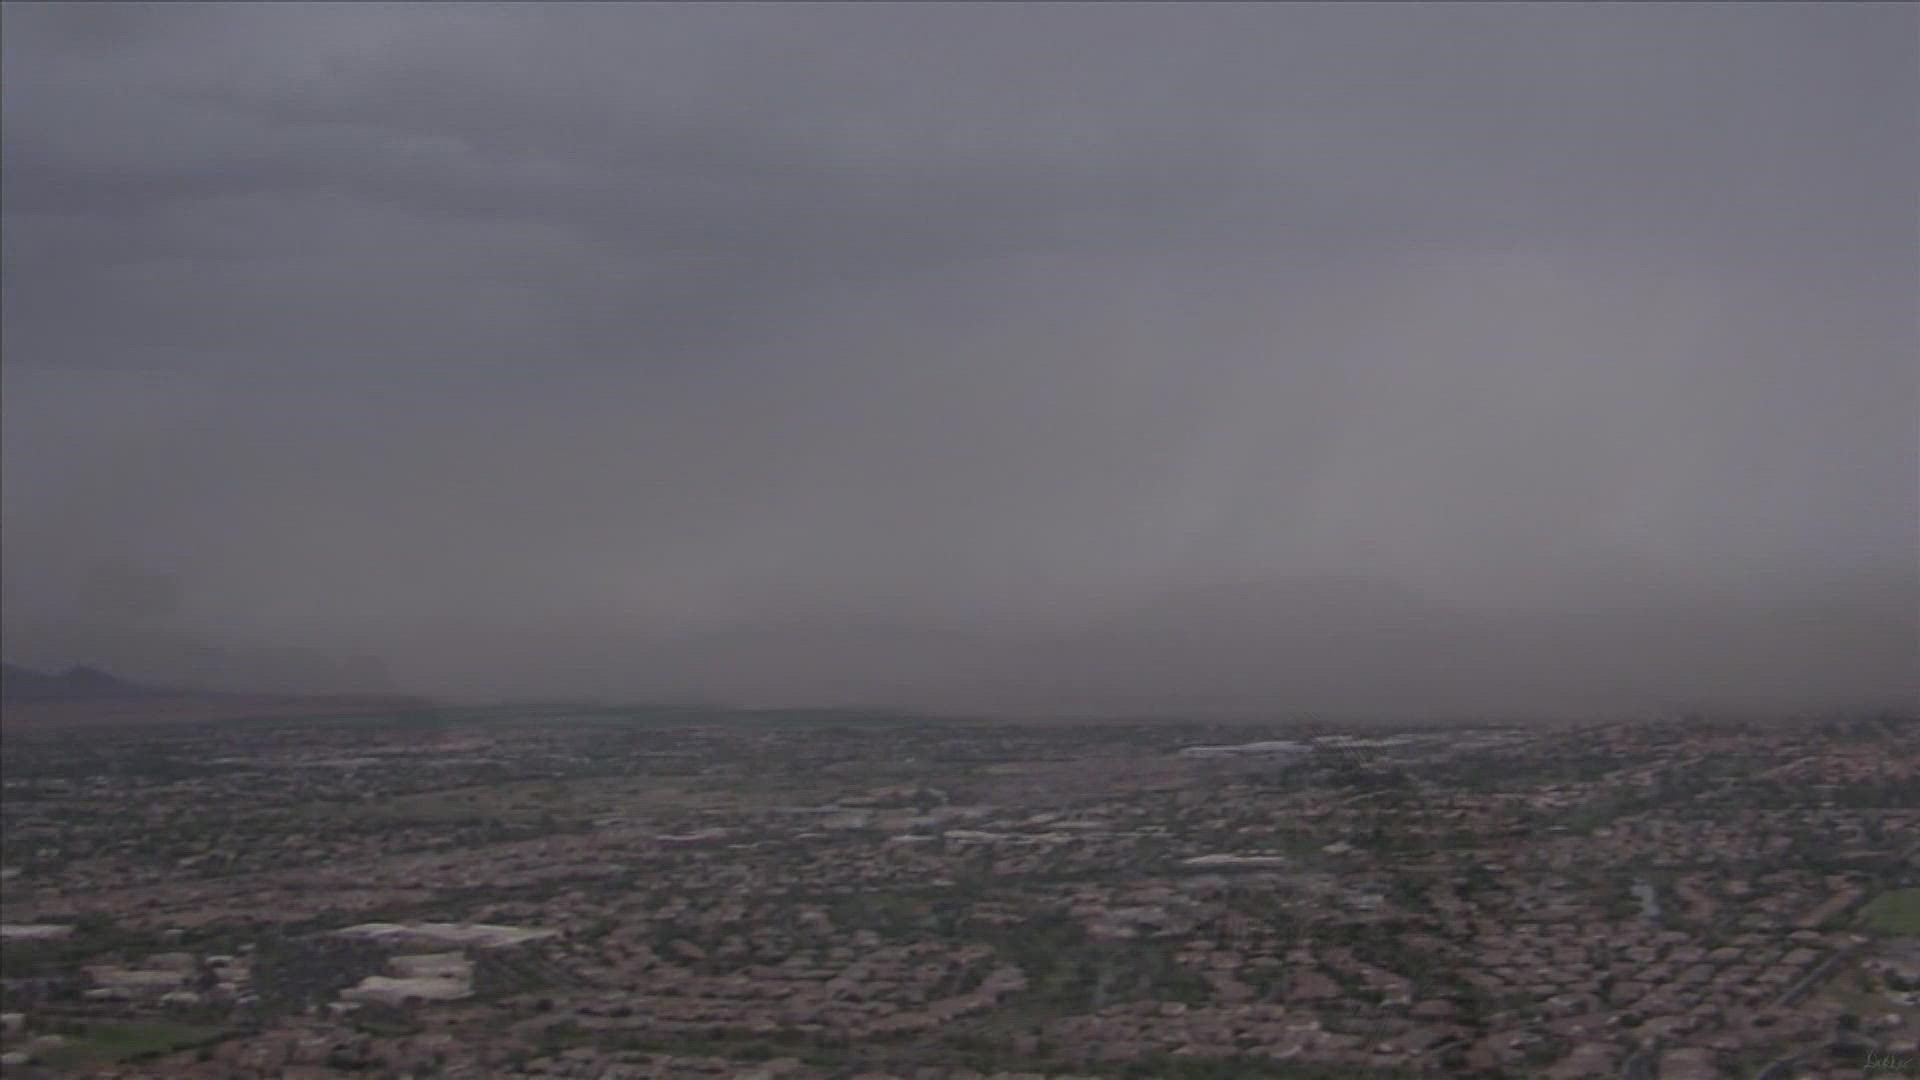 Widespread storms made it into the Valley as strong winds kick up dust and heavy rain triggered flash flooding concerns.